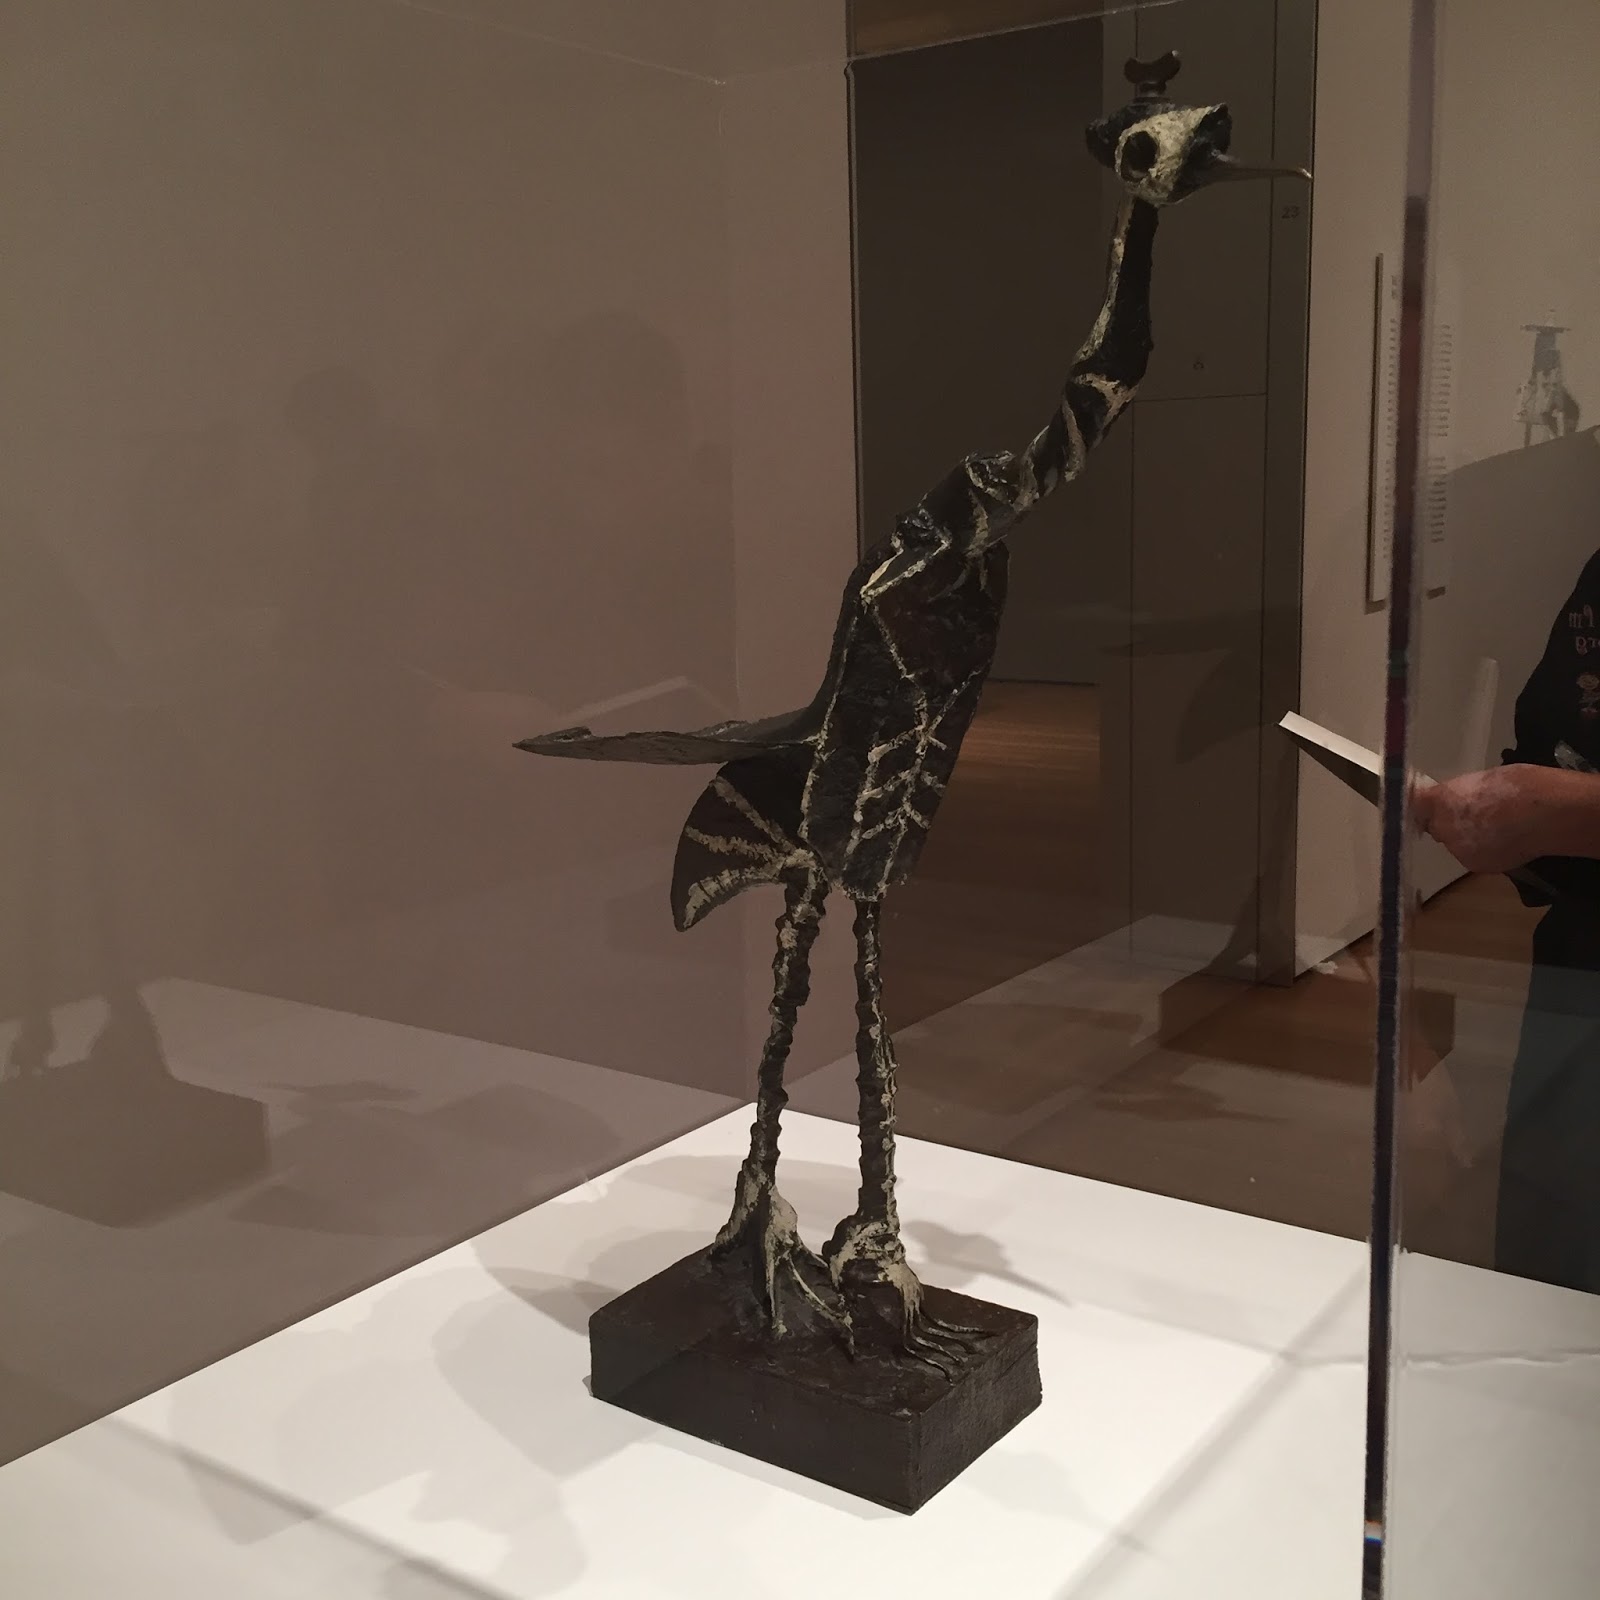 Pippa's Cabinet: Picasso Sculpture at MoMA